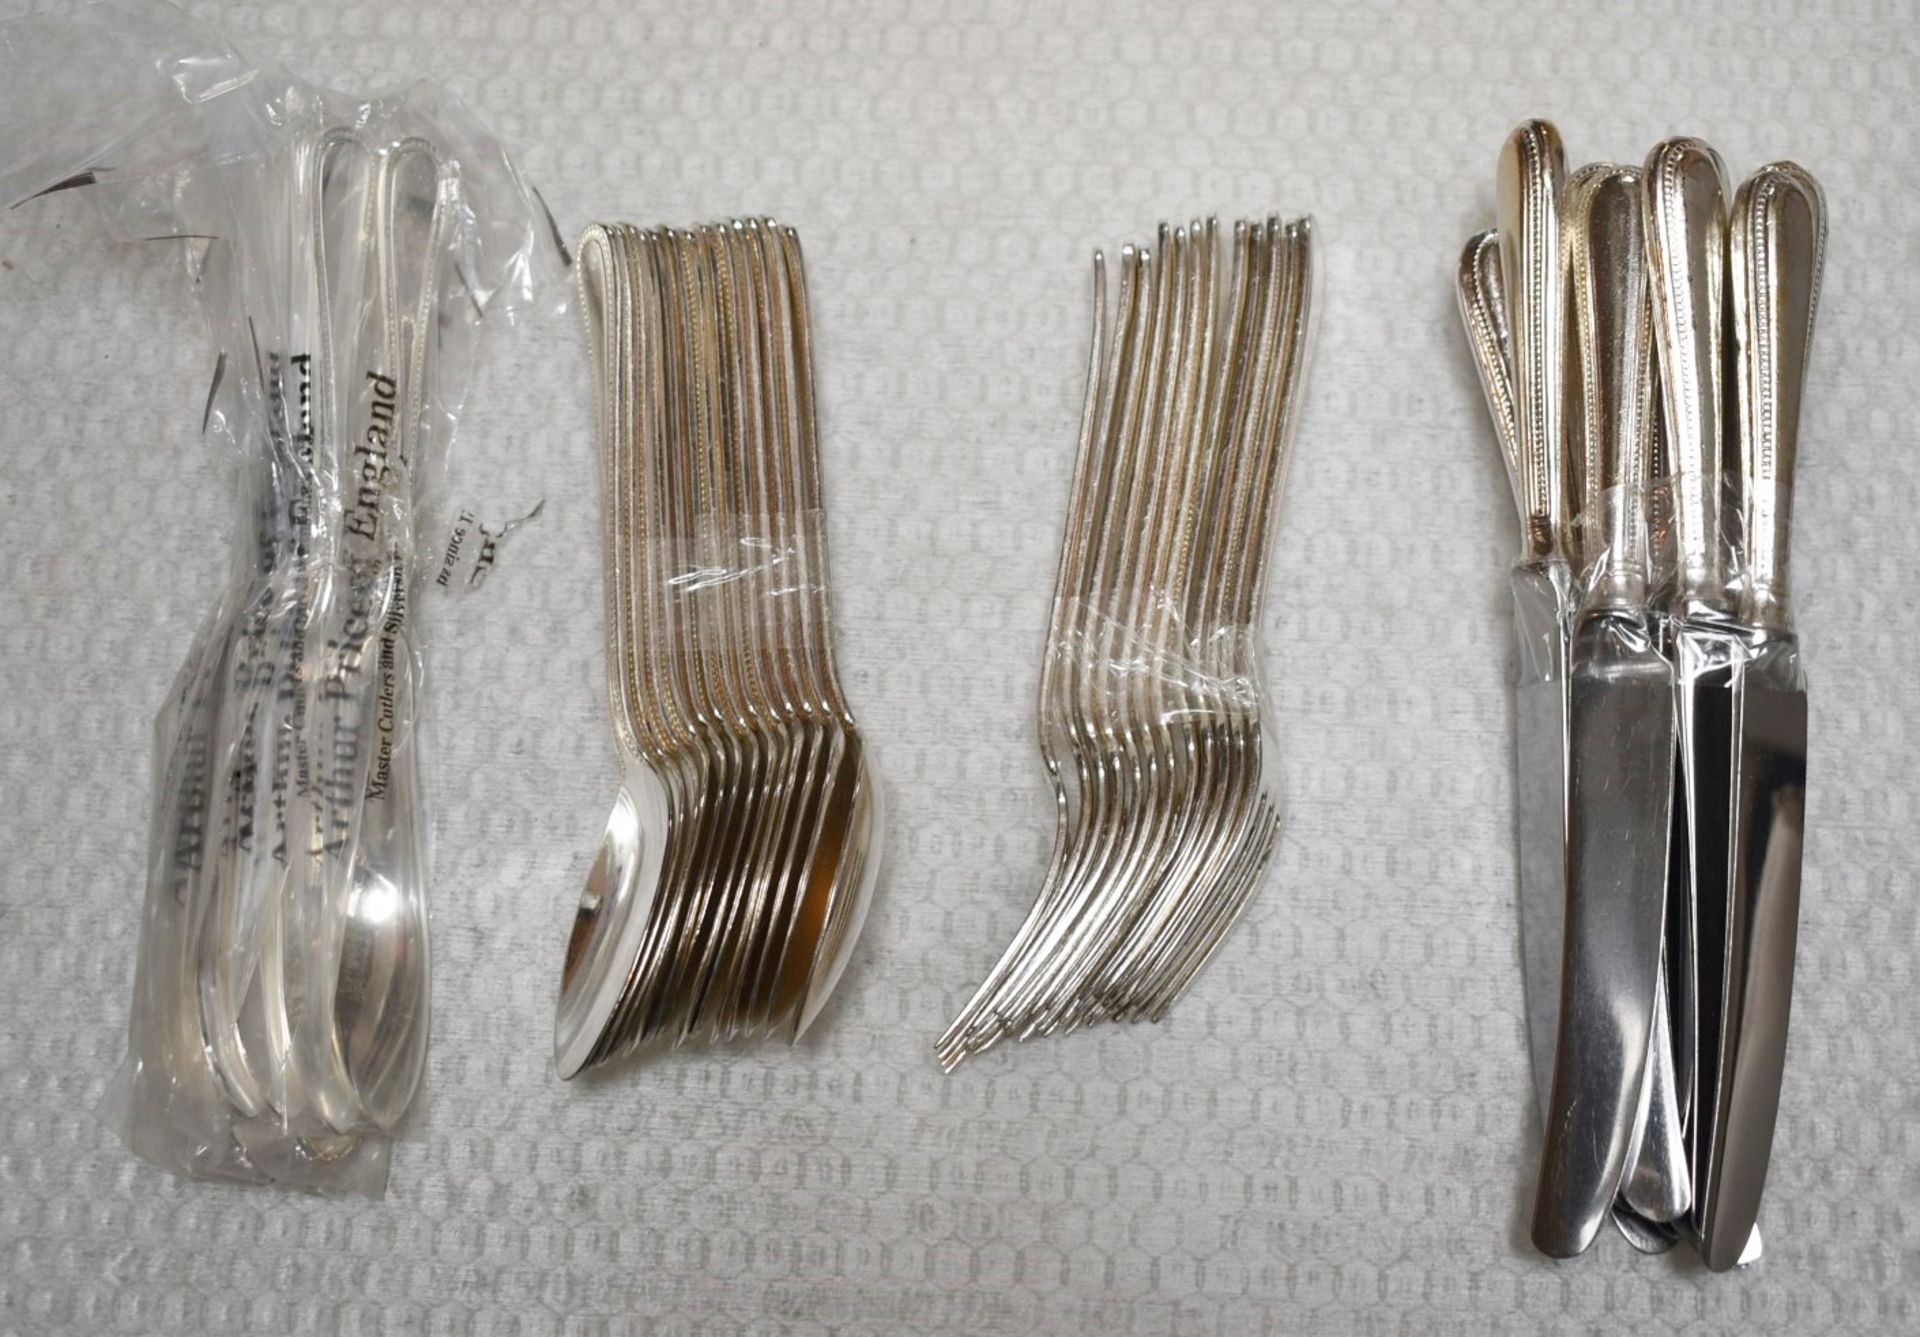 40 x Pieces of Silver Plated Stainless Steel Decorative Cutlery - Includes Knives, Forks, Spoons and - Image 7 of 11